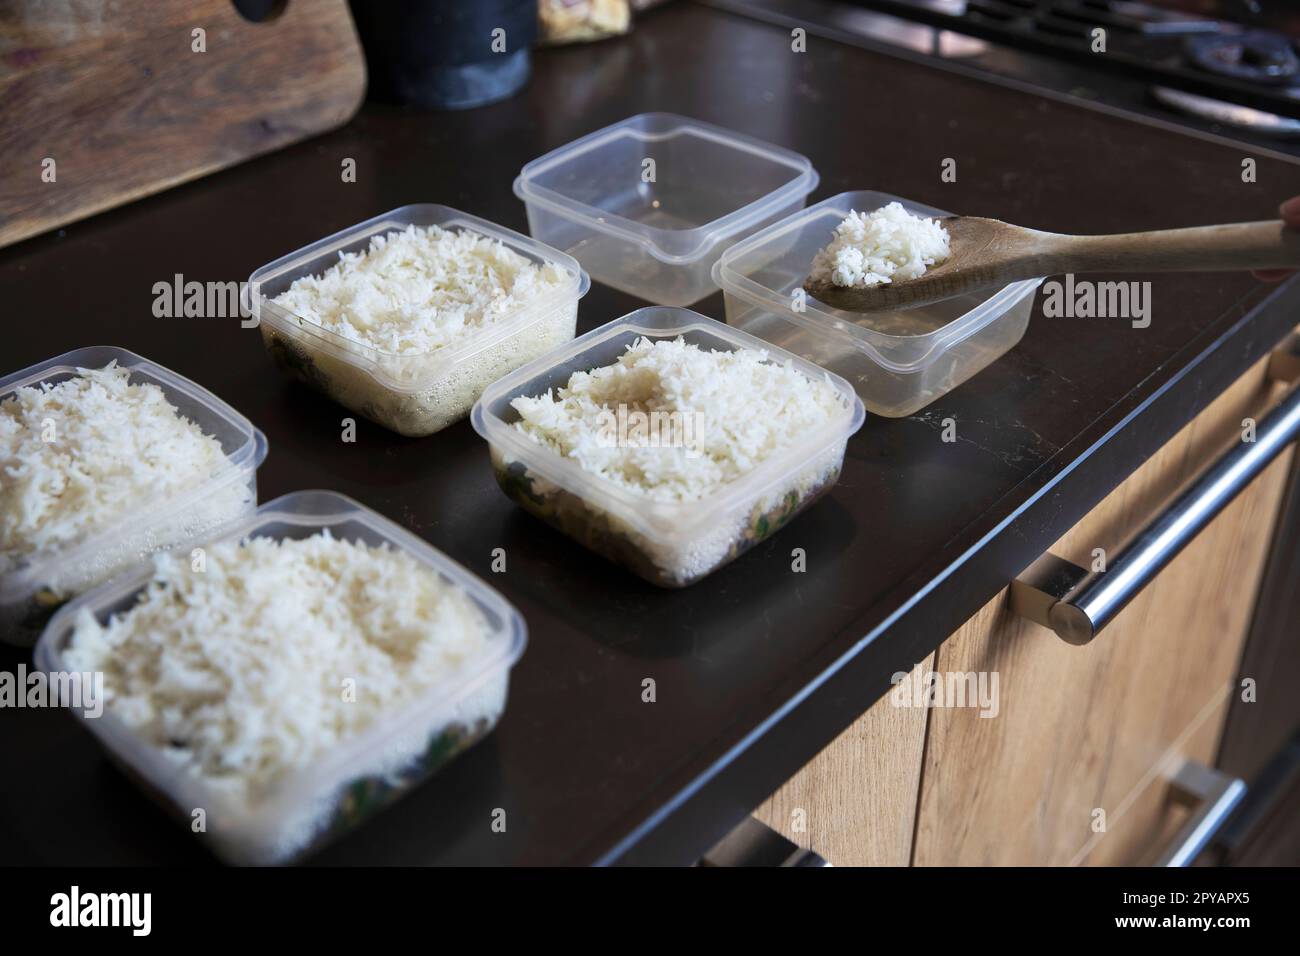 Meal prep. Stack of home cooked rice and chicken dinners in containers ready to be frozen for later use as quick and easy ready meals. Food prepping for healthy dieting Stock Photo